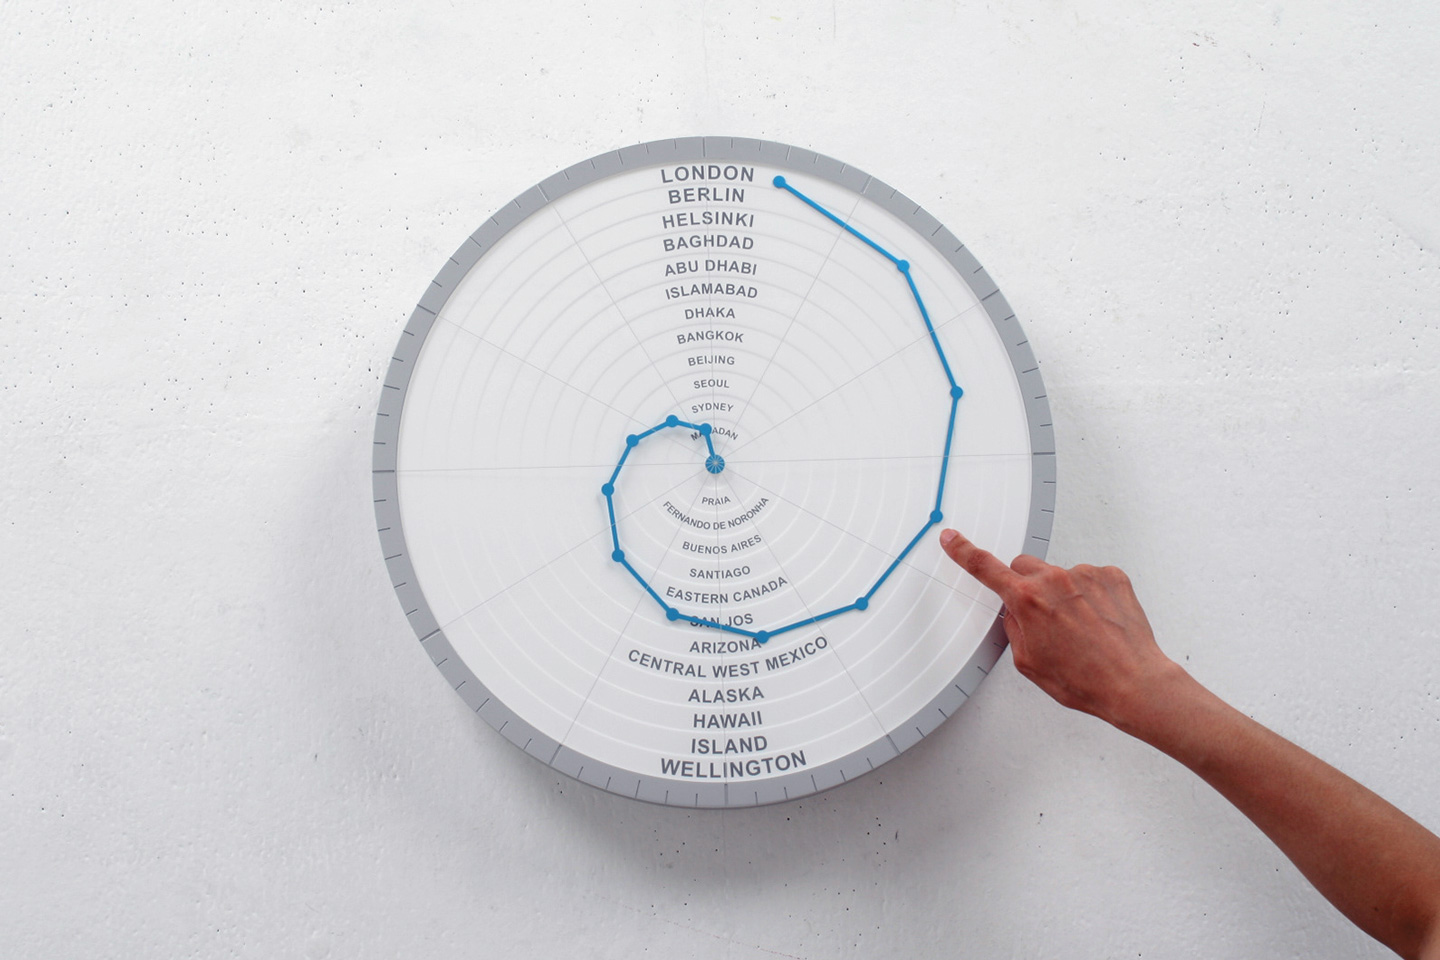 #Genius World Clock uses a Golden Spiral to show the time in every single time zone simultaneously